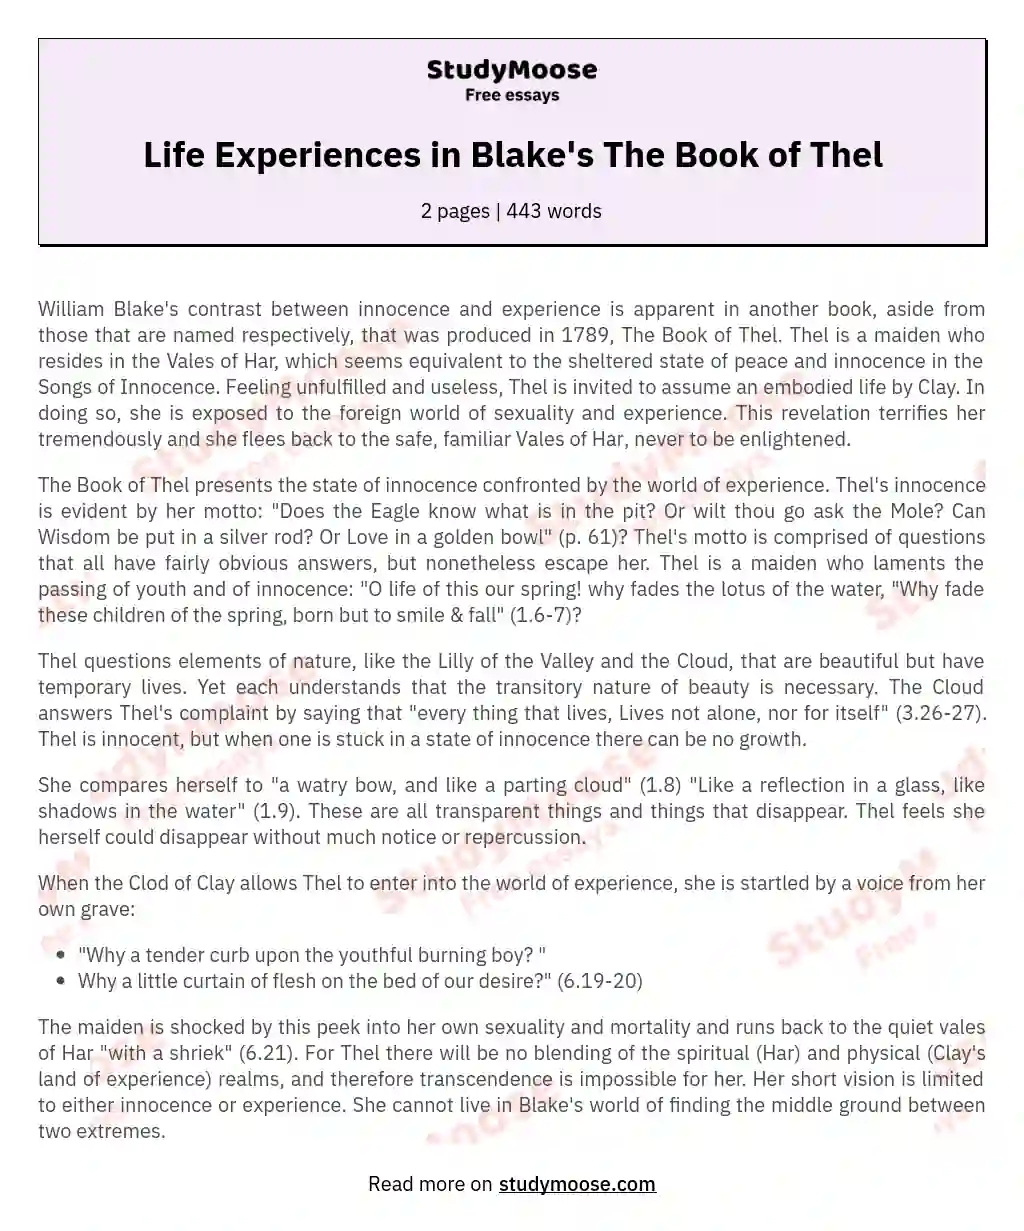 Life Experiences in Blake's The Book of Thel essay